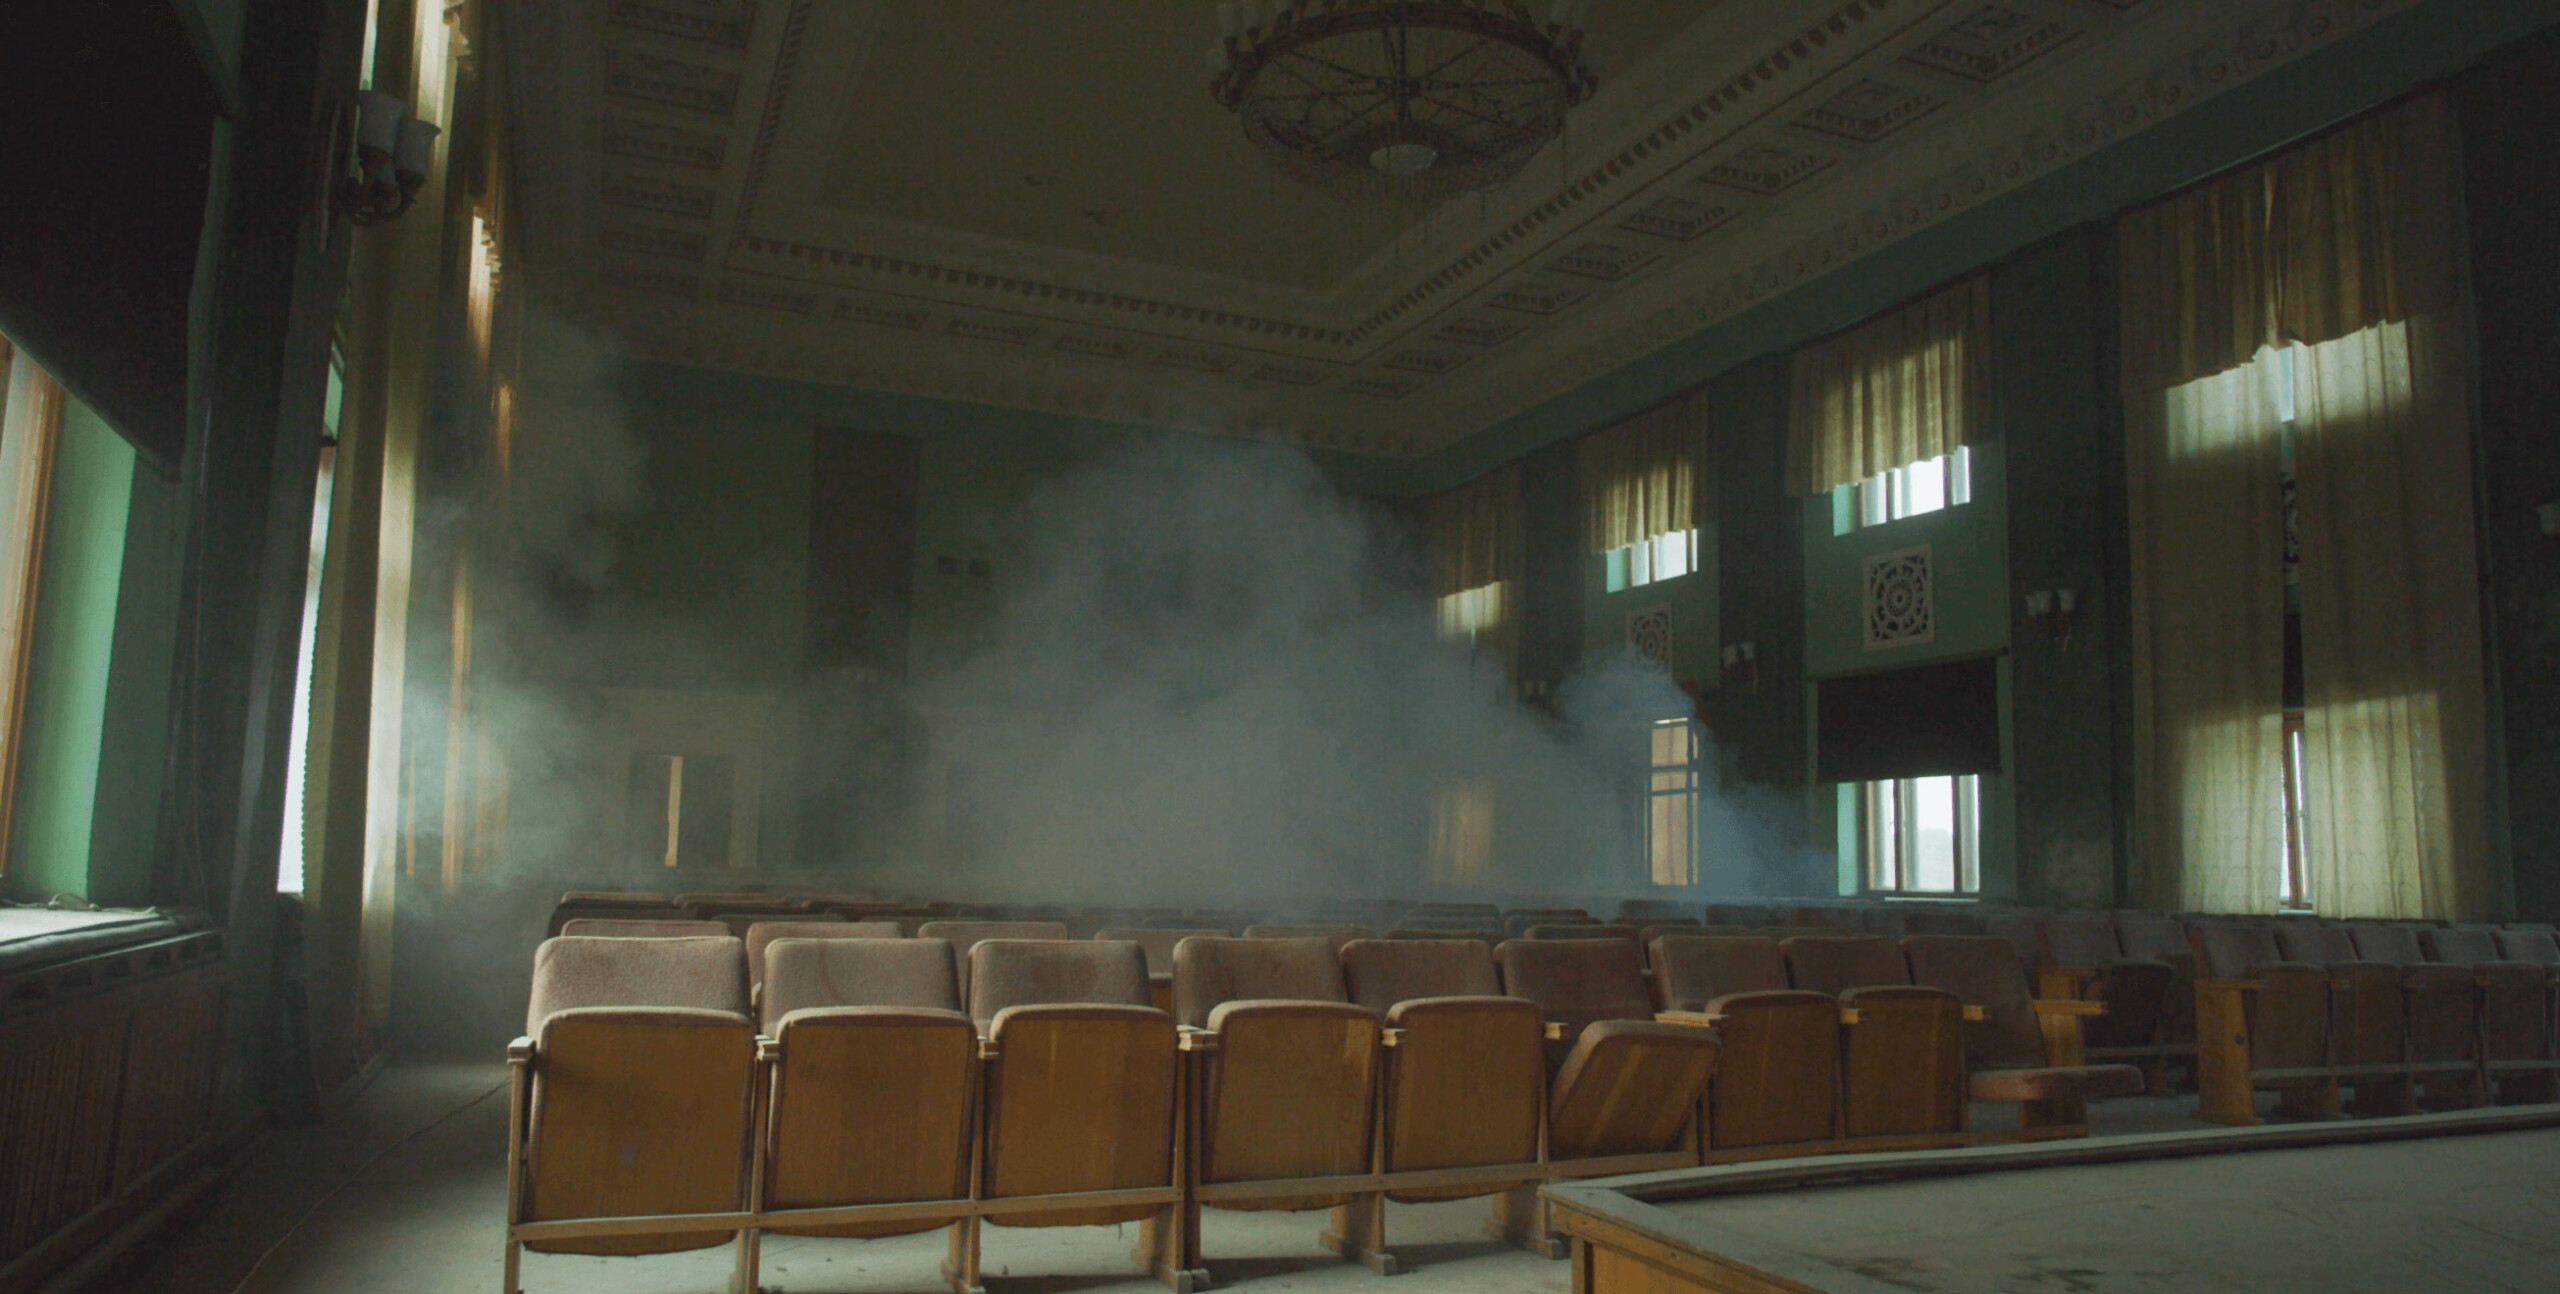 video still, view from the stage of an empty auditorium filled with smoke or dust